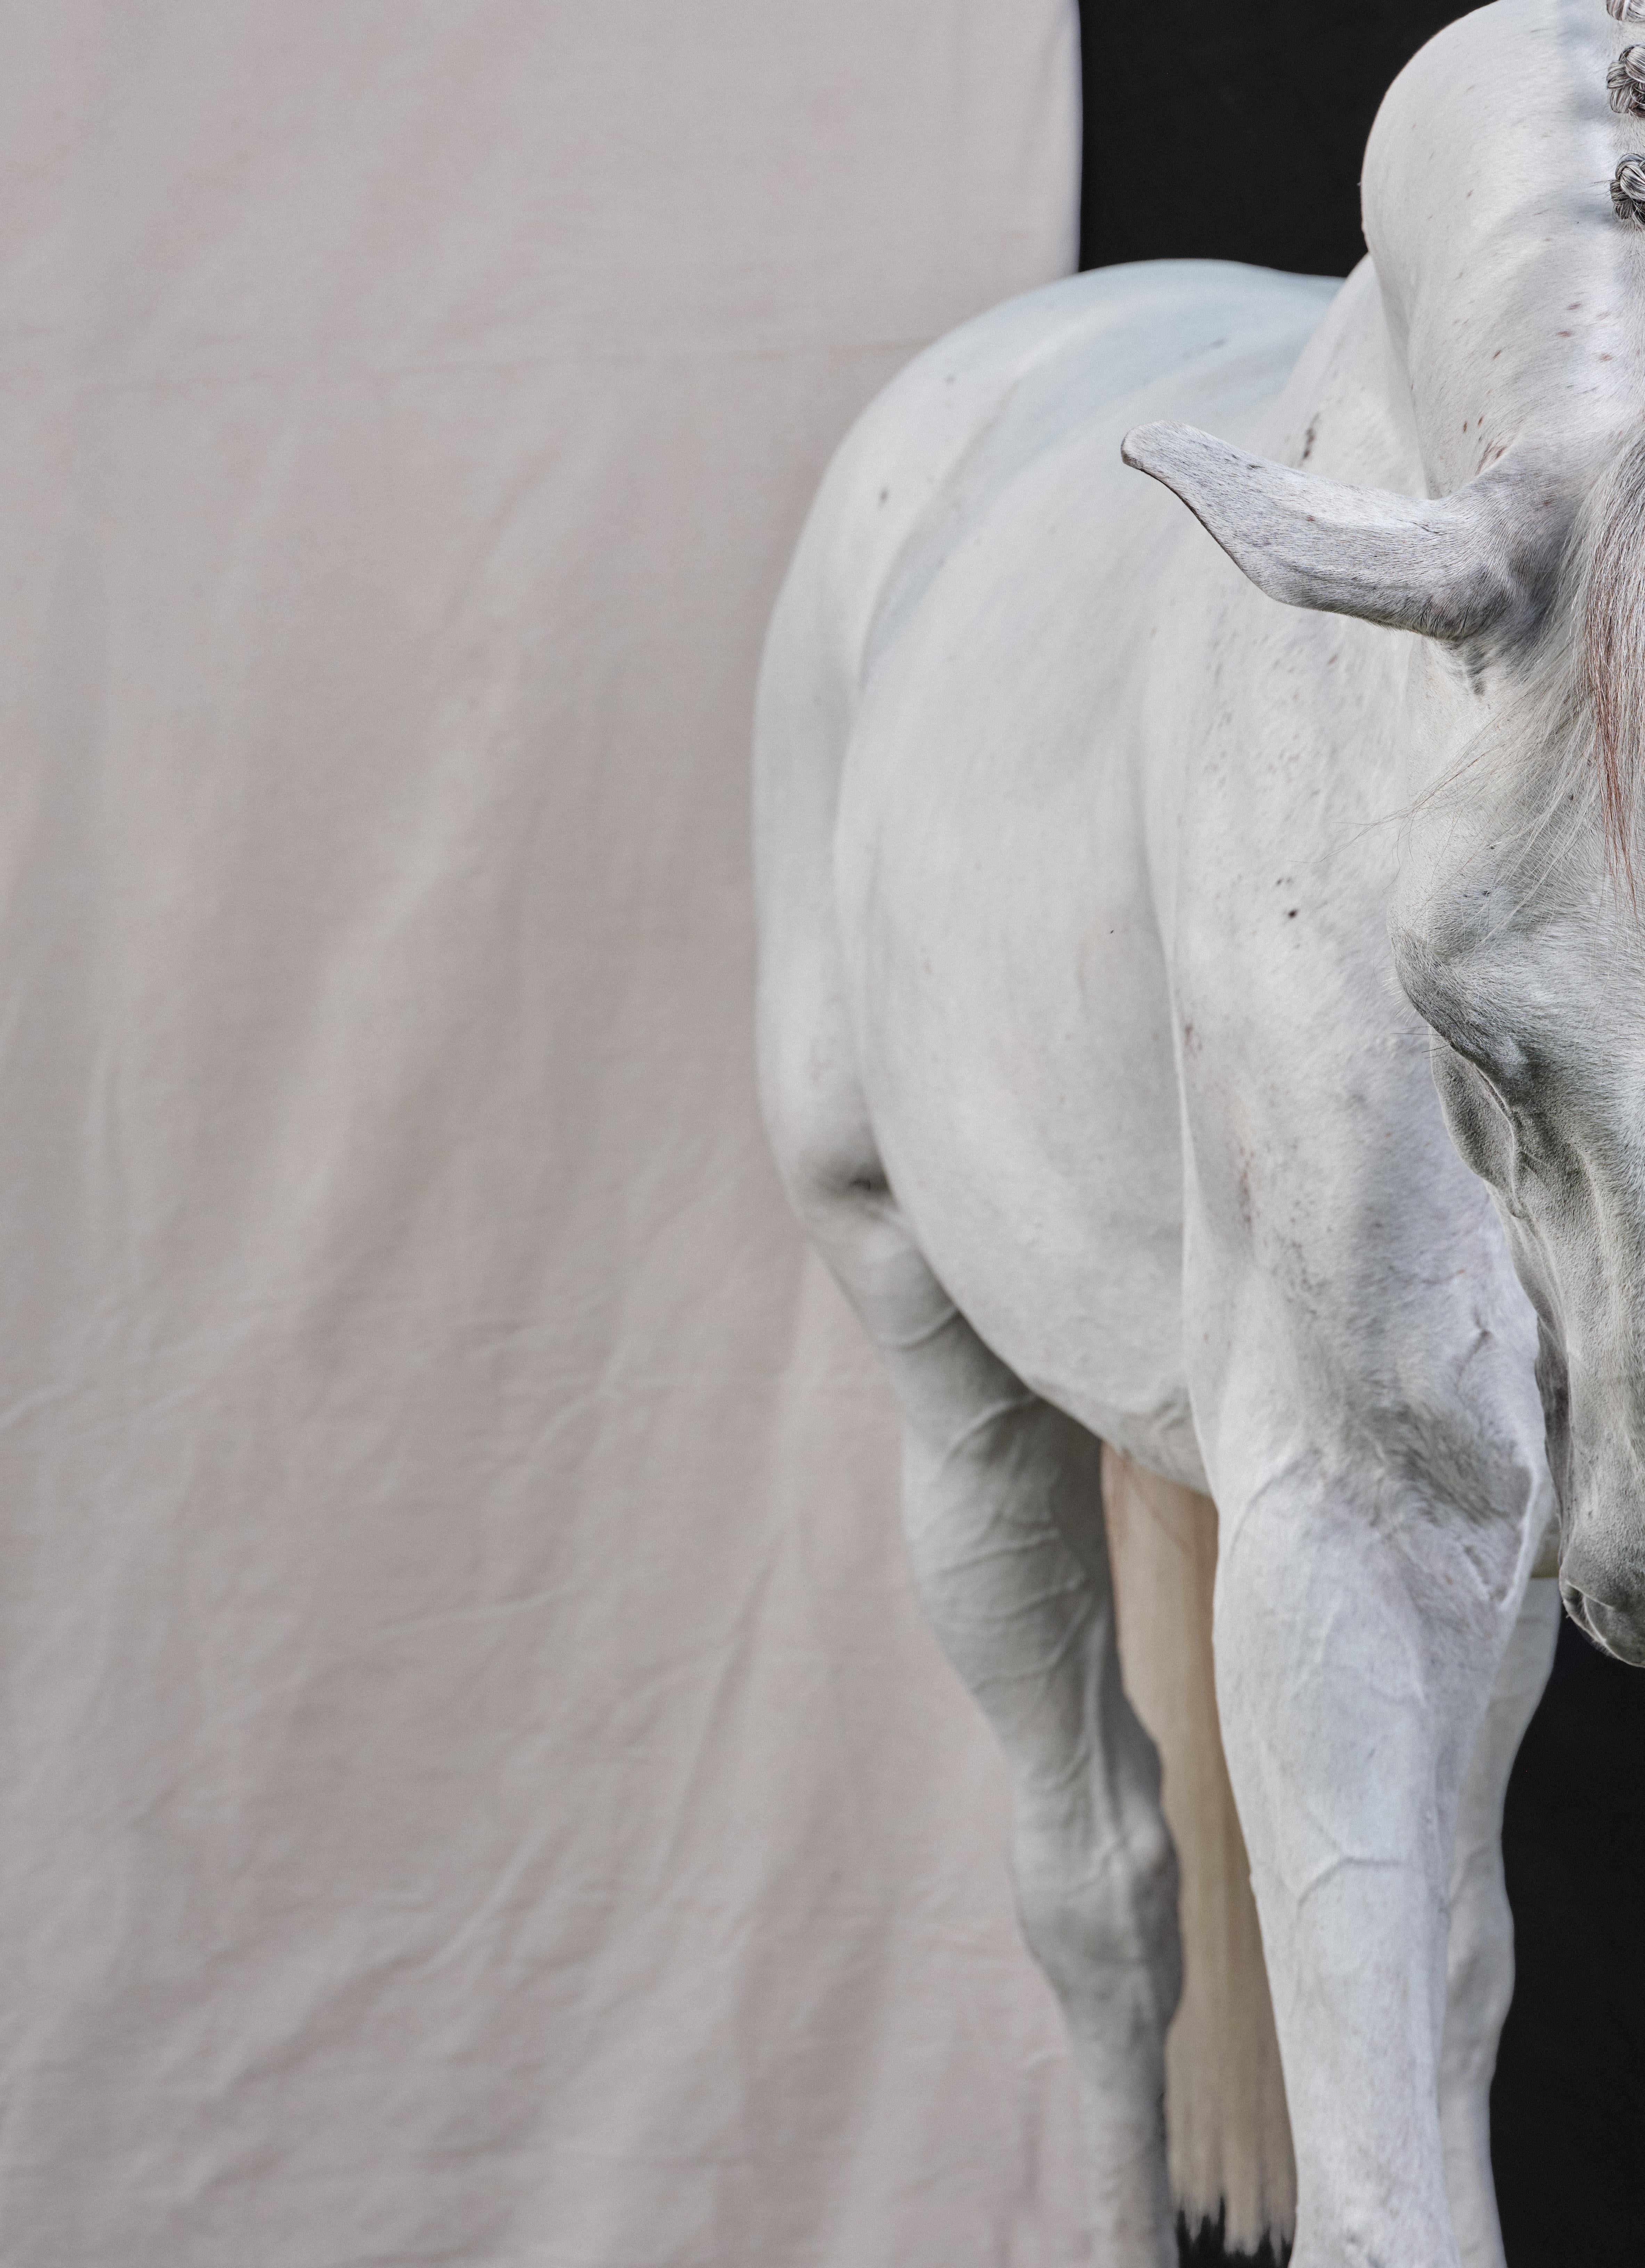 Casper, 2019 by Juan Lamarca
Fine art archival cotton paper
Image size: 40 x 30 inches
Edition 2 of 10 plus 2 AP
Unframed

Juan Lamarca's Horse Series, is an abstract collection of photographs featuring high performance horses. The images seek to